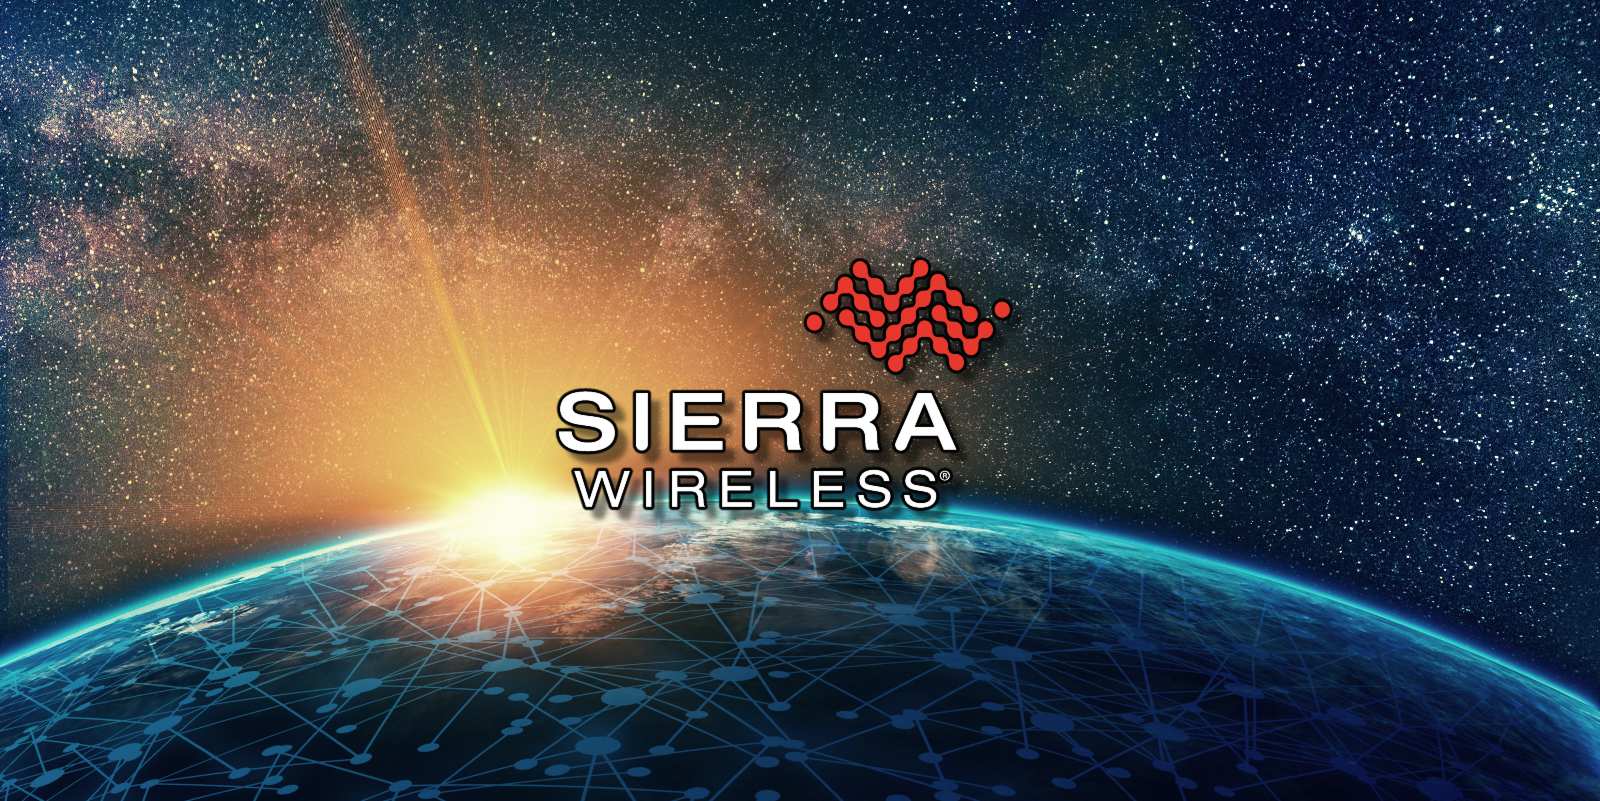 Sierra Wireless resumes production after ransomware attack